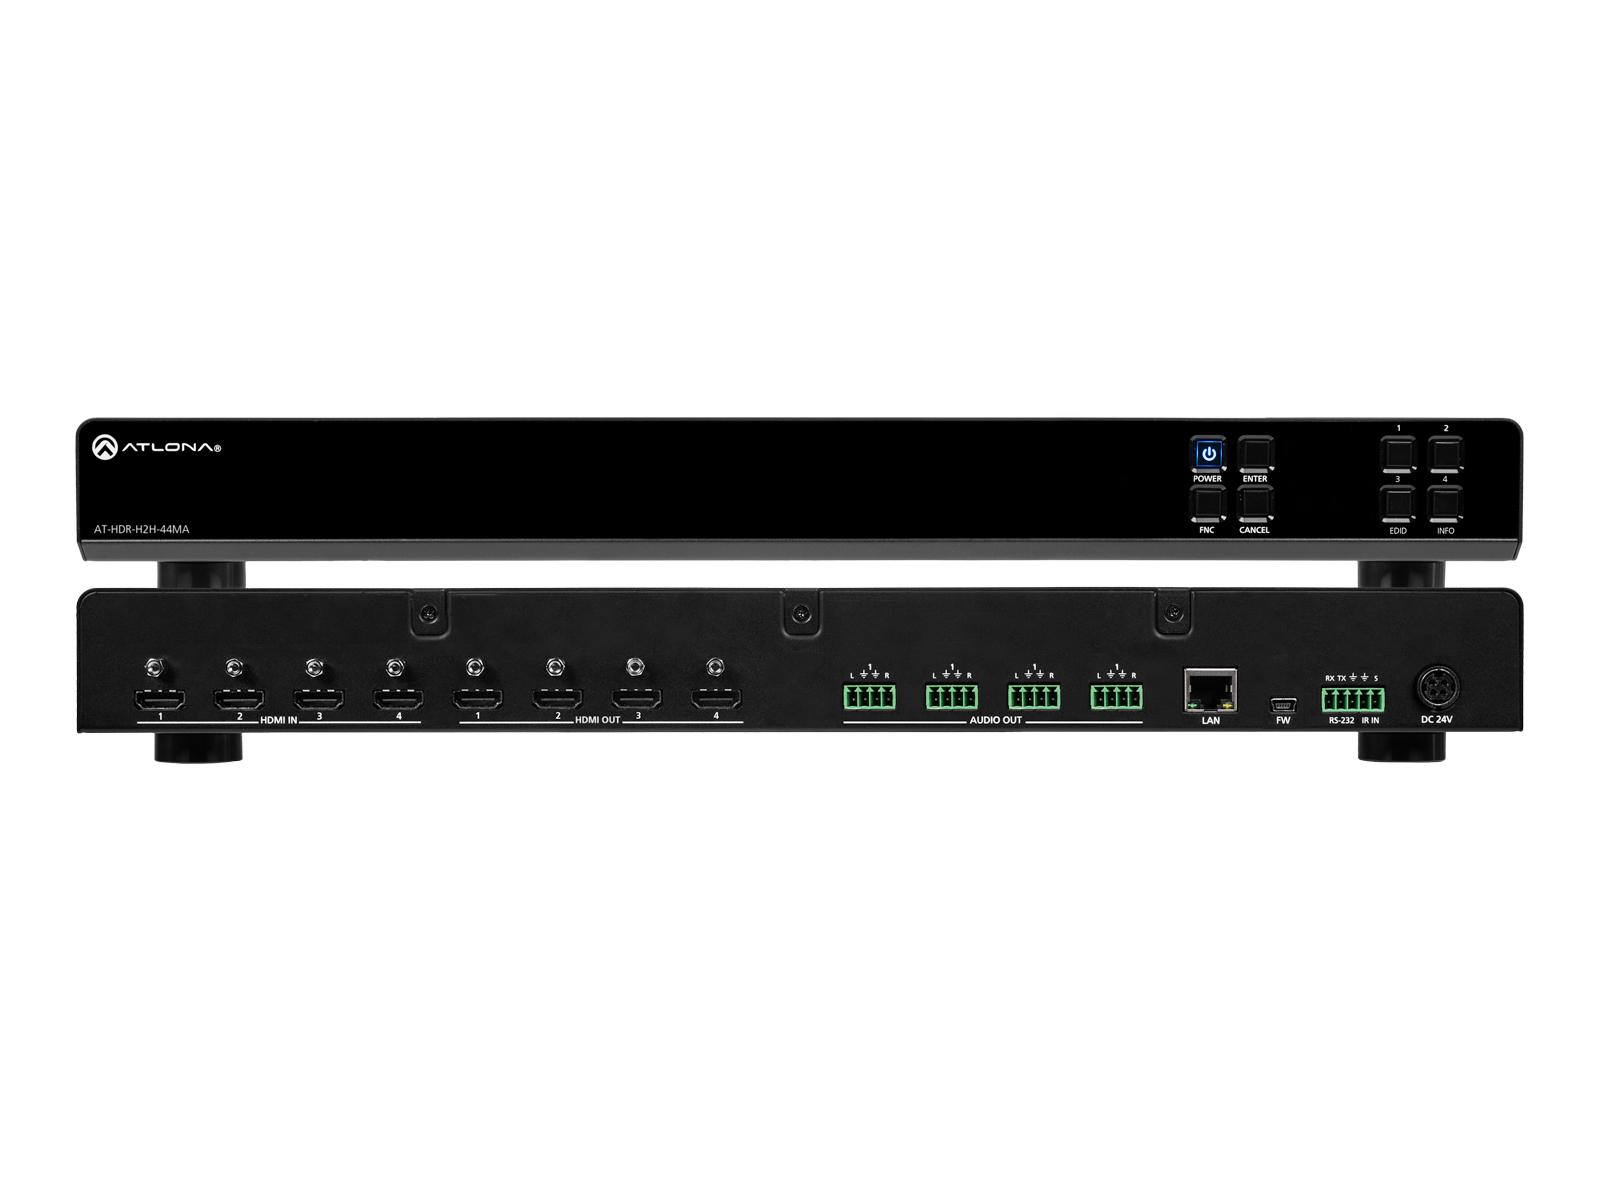 AT-HDR-H2H-44MA 4K HDR 4x4 HDMI Matrix Switcher with TCP/IP/RS-232/IR control by Atlona